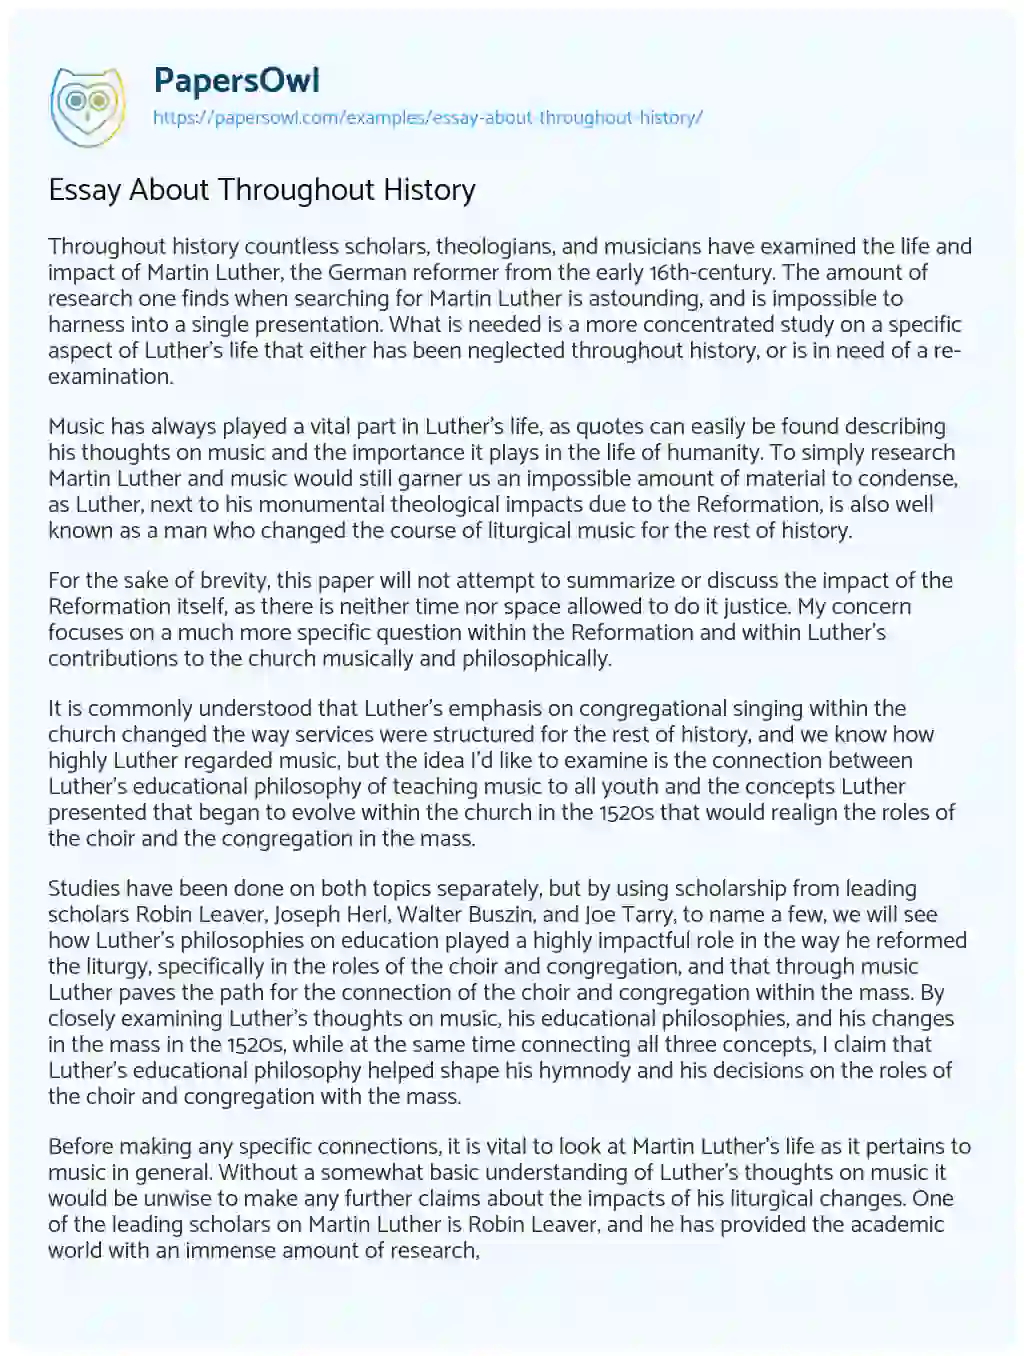 Essay on Essay about Throughout History